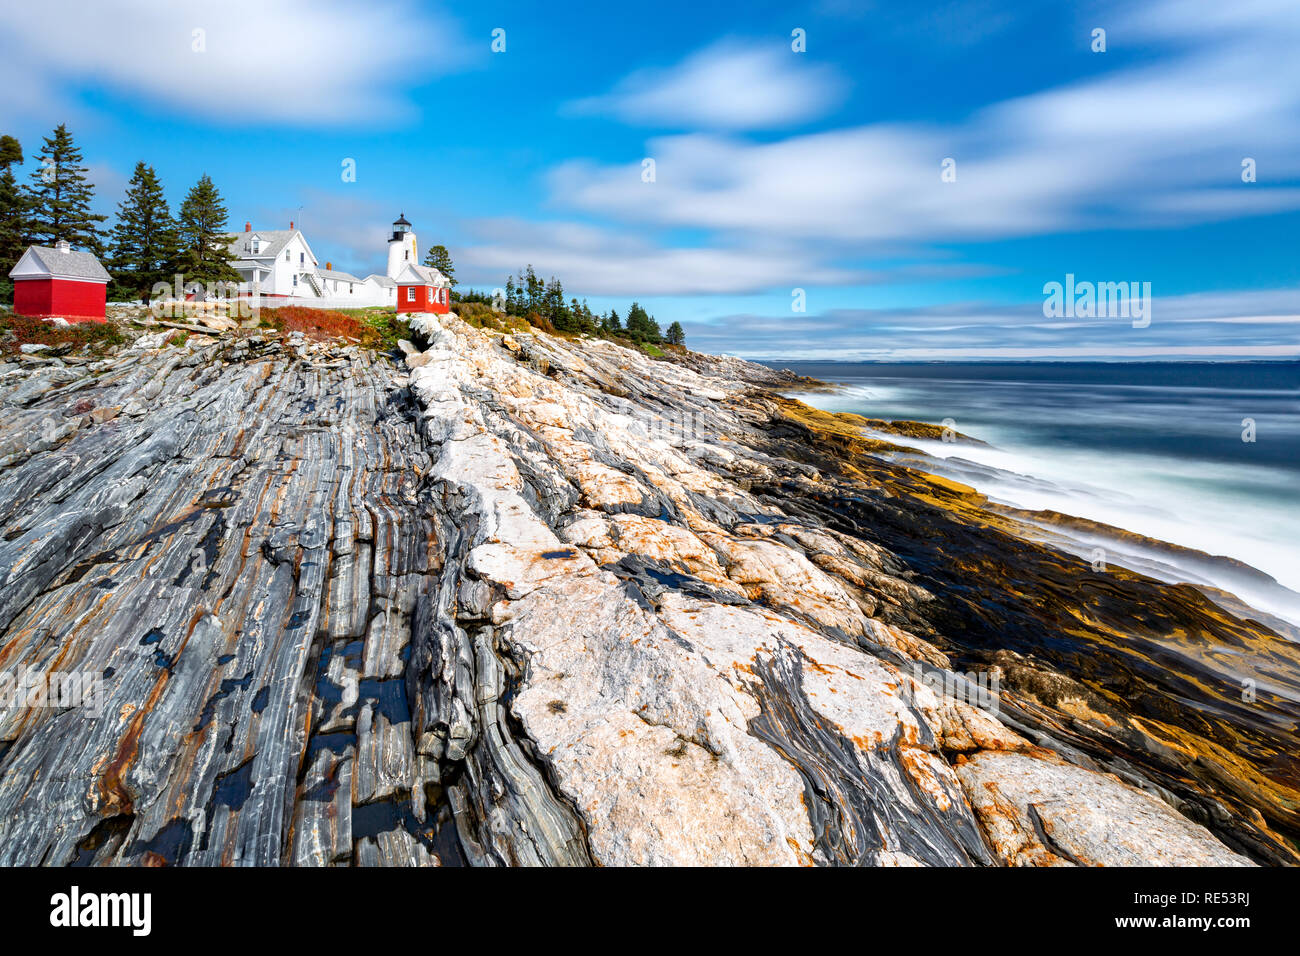 Pemaquid Point Light. The Pemaquid Point Light is a historic US lighthouse located in Bristol, Lincoln County, Maine, at the tip of the Pemaquid Neck. Stock Photo